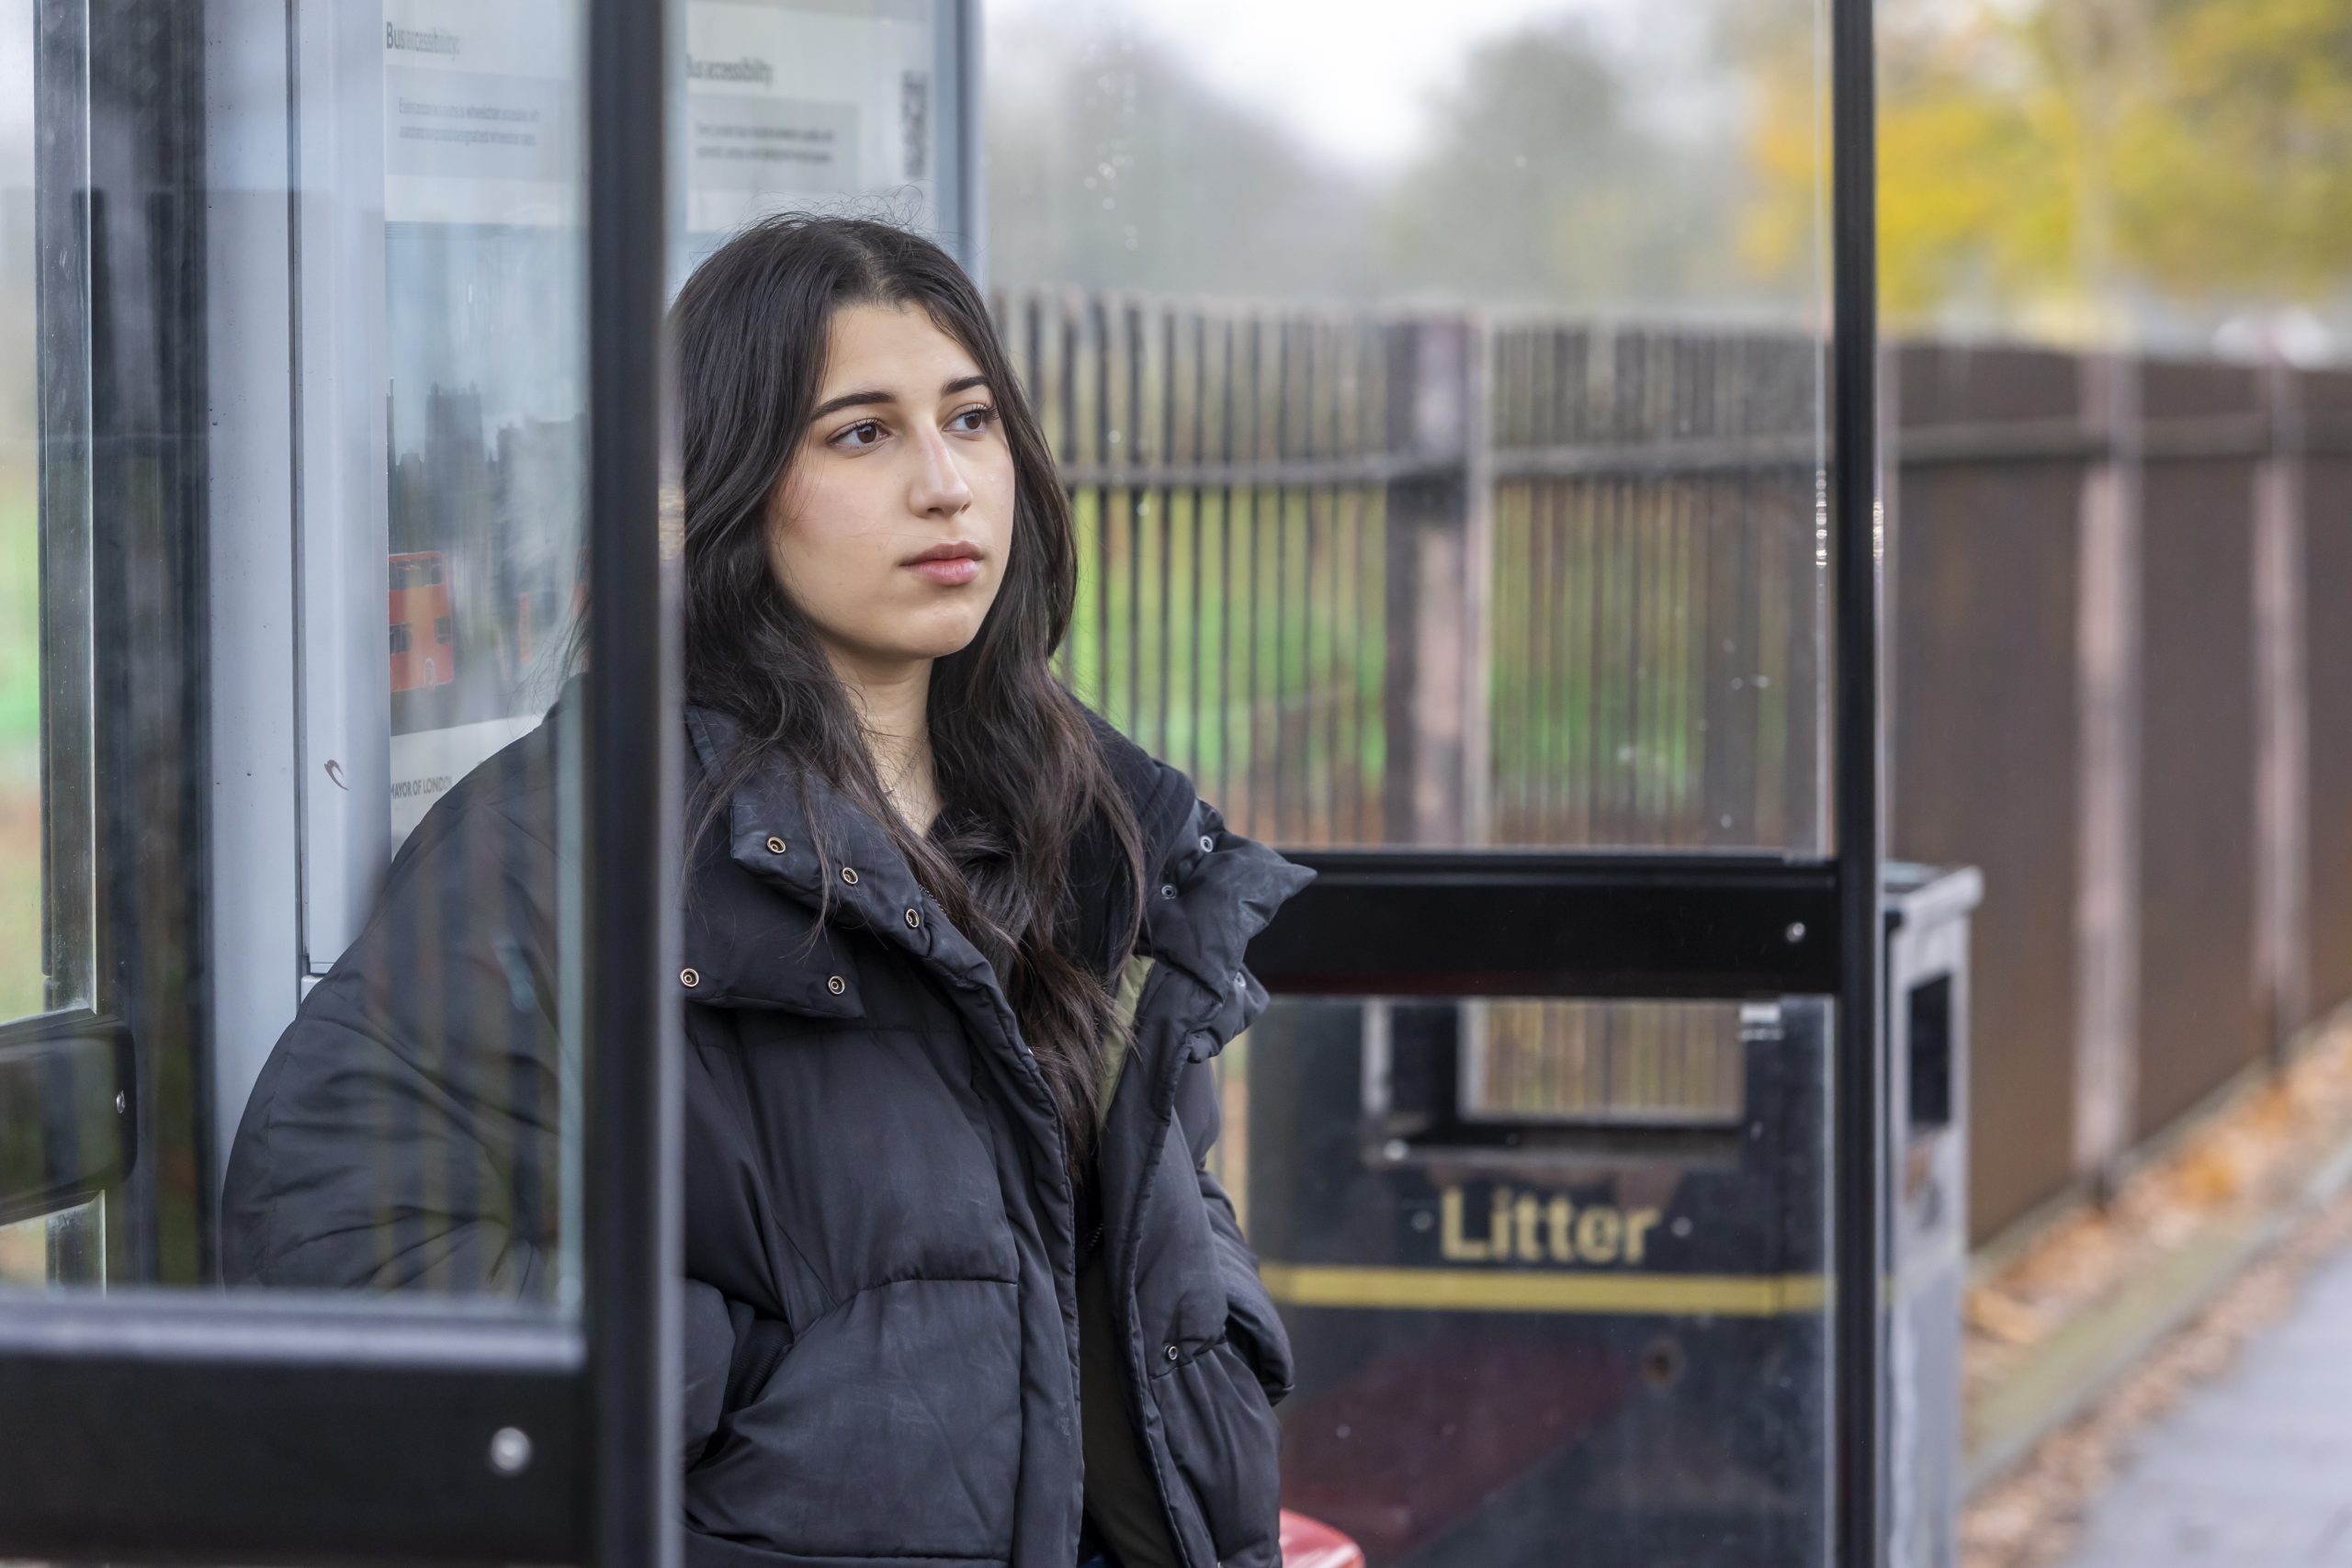 A young woman is sitting at a bus stop. She is thinking about losing her virginity.